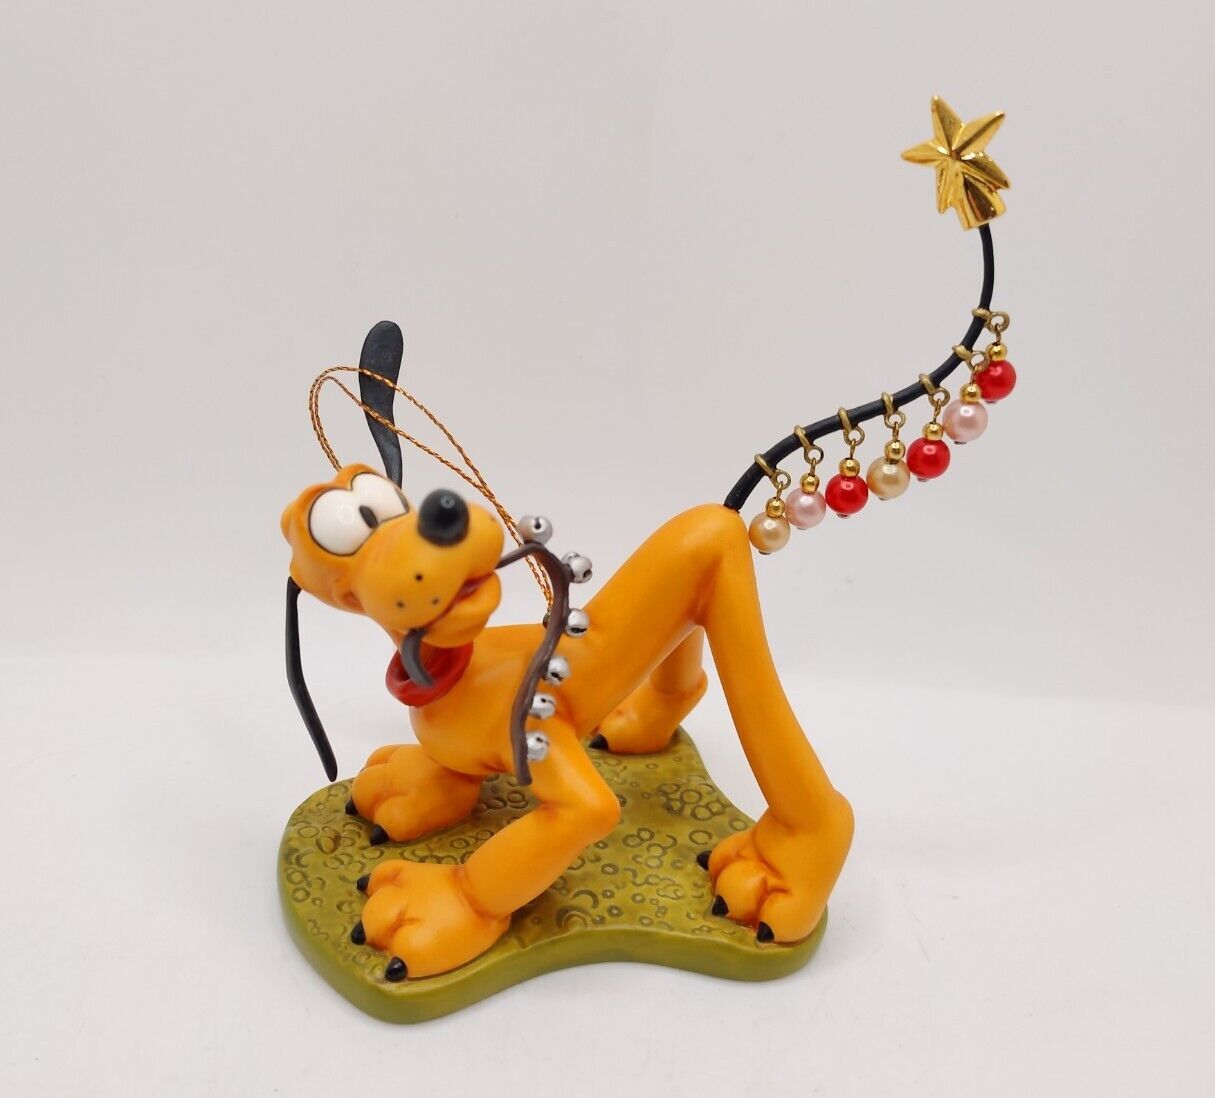 WDCC Pluto Ornament 1996 Pluto Helps Decorate Pluto\'s Christmas Tree With Box